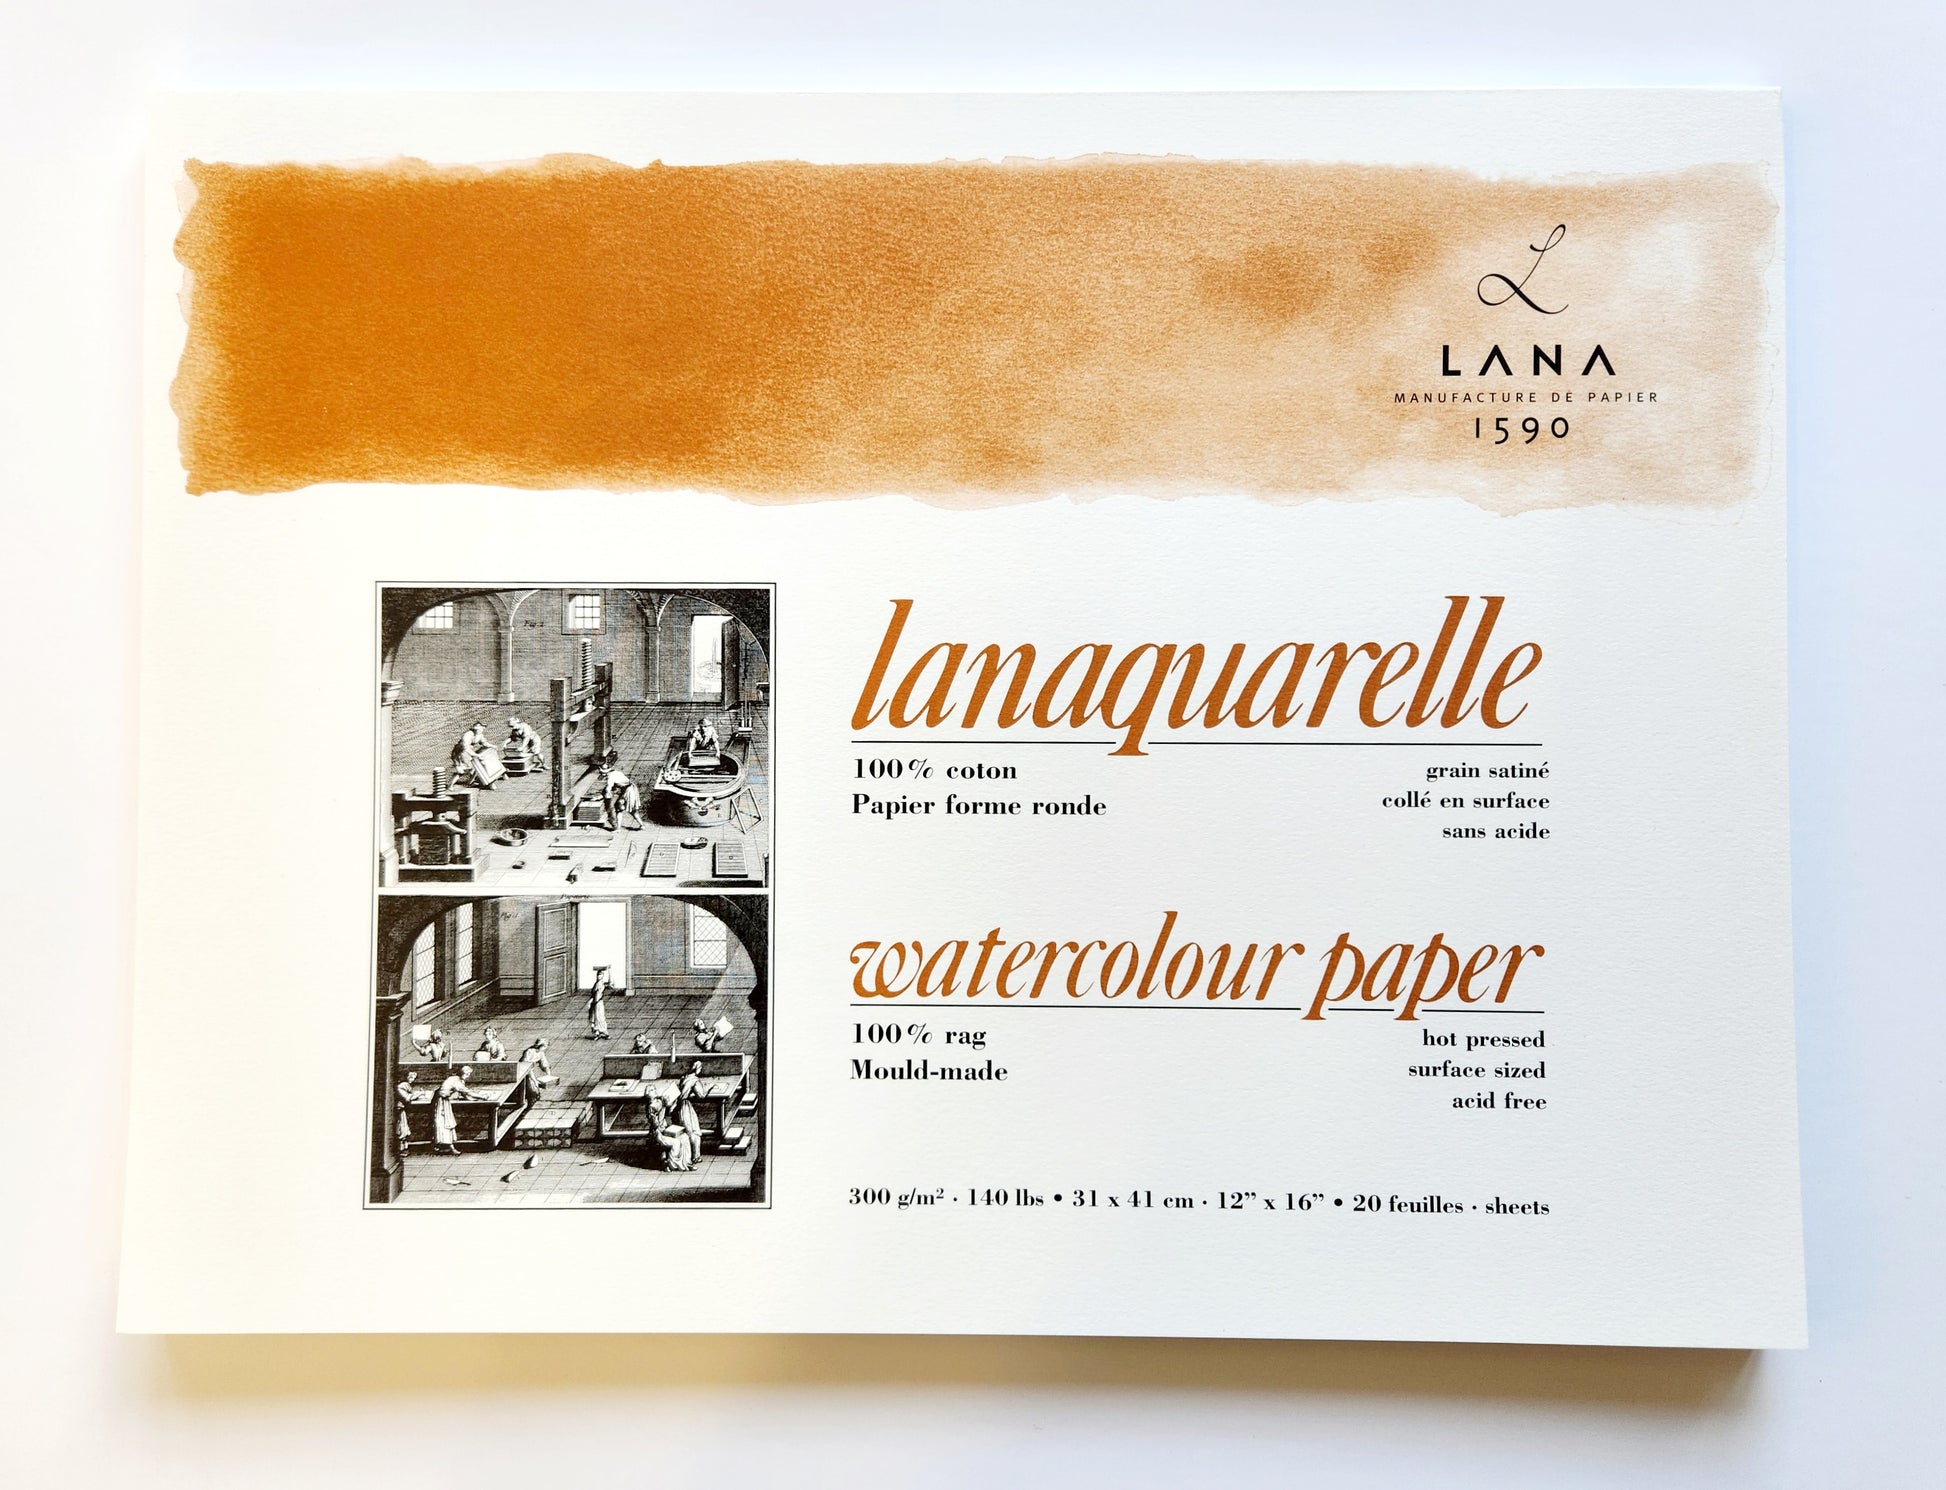 Lanaquarelle Aquarelle Pad 31 x 41 cm 300g Hot Pressed  Best quality cotton aquarelle paper. 100% cotton. Size 31 x 41 cm, 300g/m2, 20 sheets glued on all 4 sides. Smooth paper for portraits or detailed work.